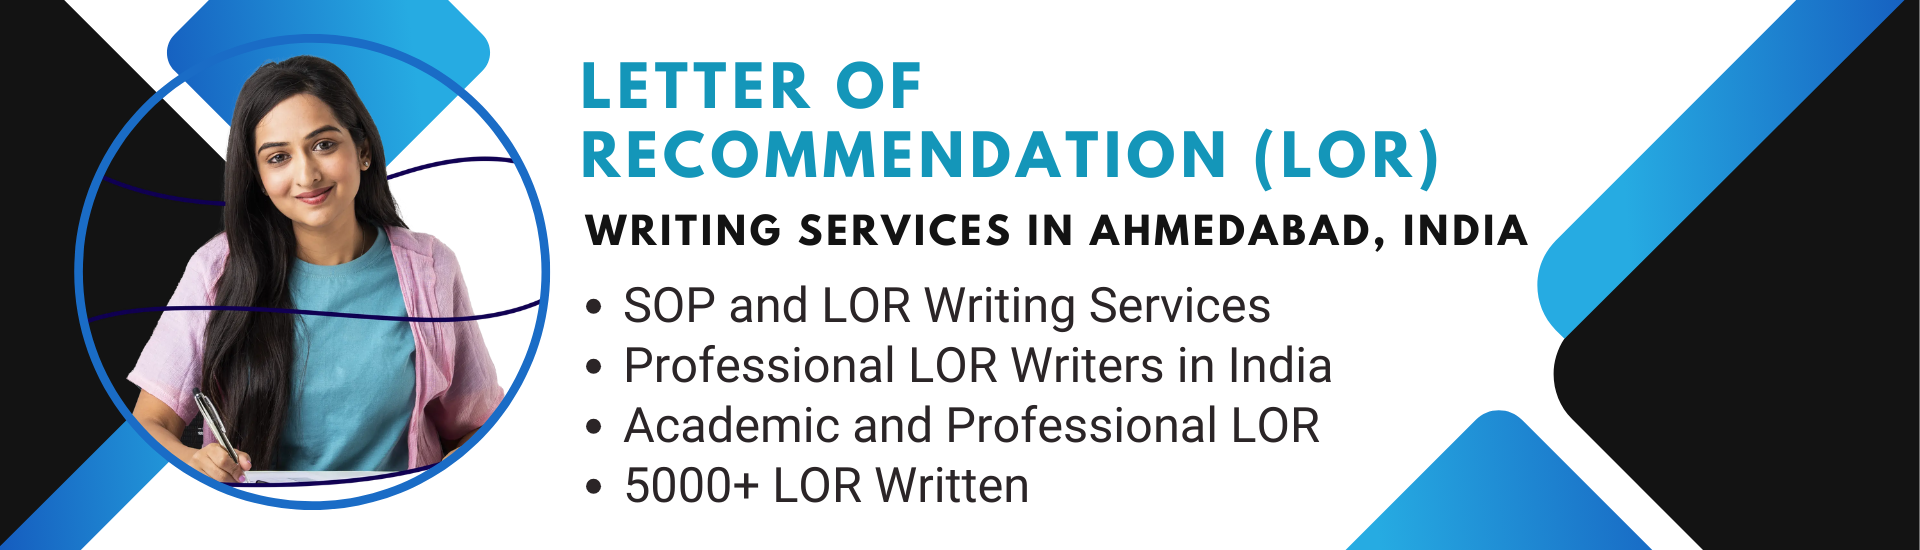 Letter of Recommendation (LOR)